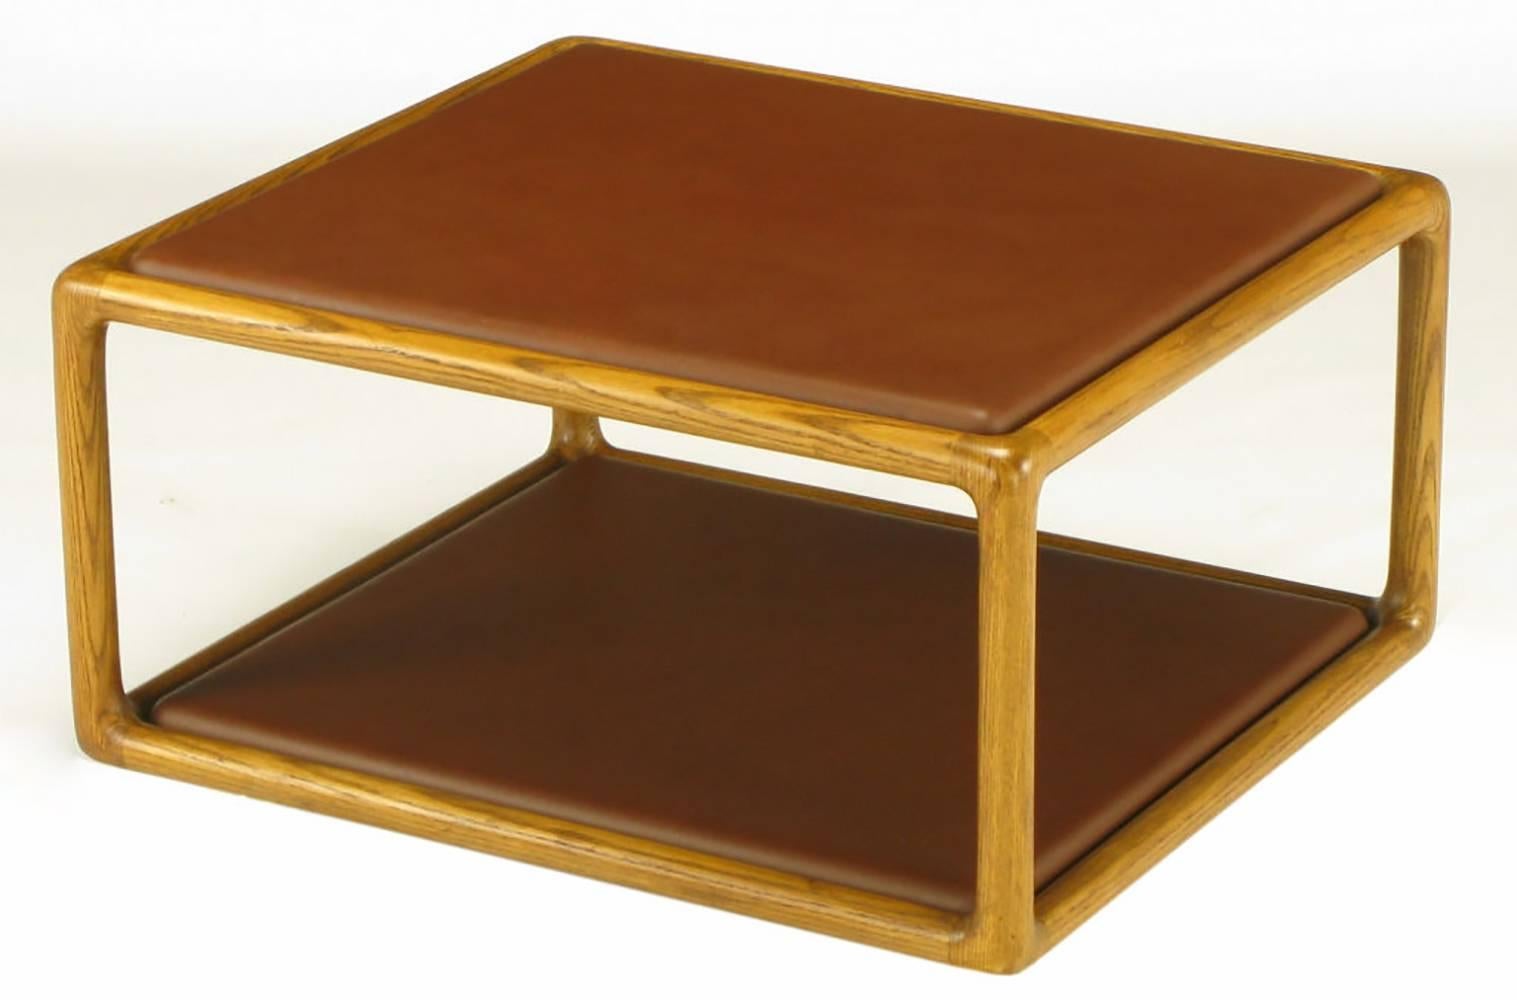 Ward Bennett for Brickel Associates Inc., honey ashwood and russet-chestnut brown tanned elephant hide coffee table. Can be used as an ottoman. Radiused at all edges and corners.